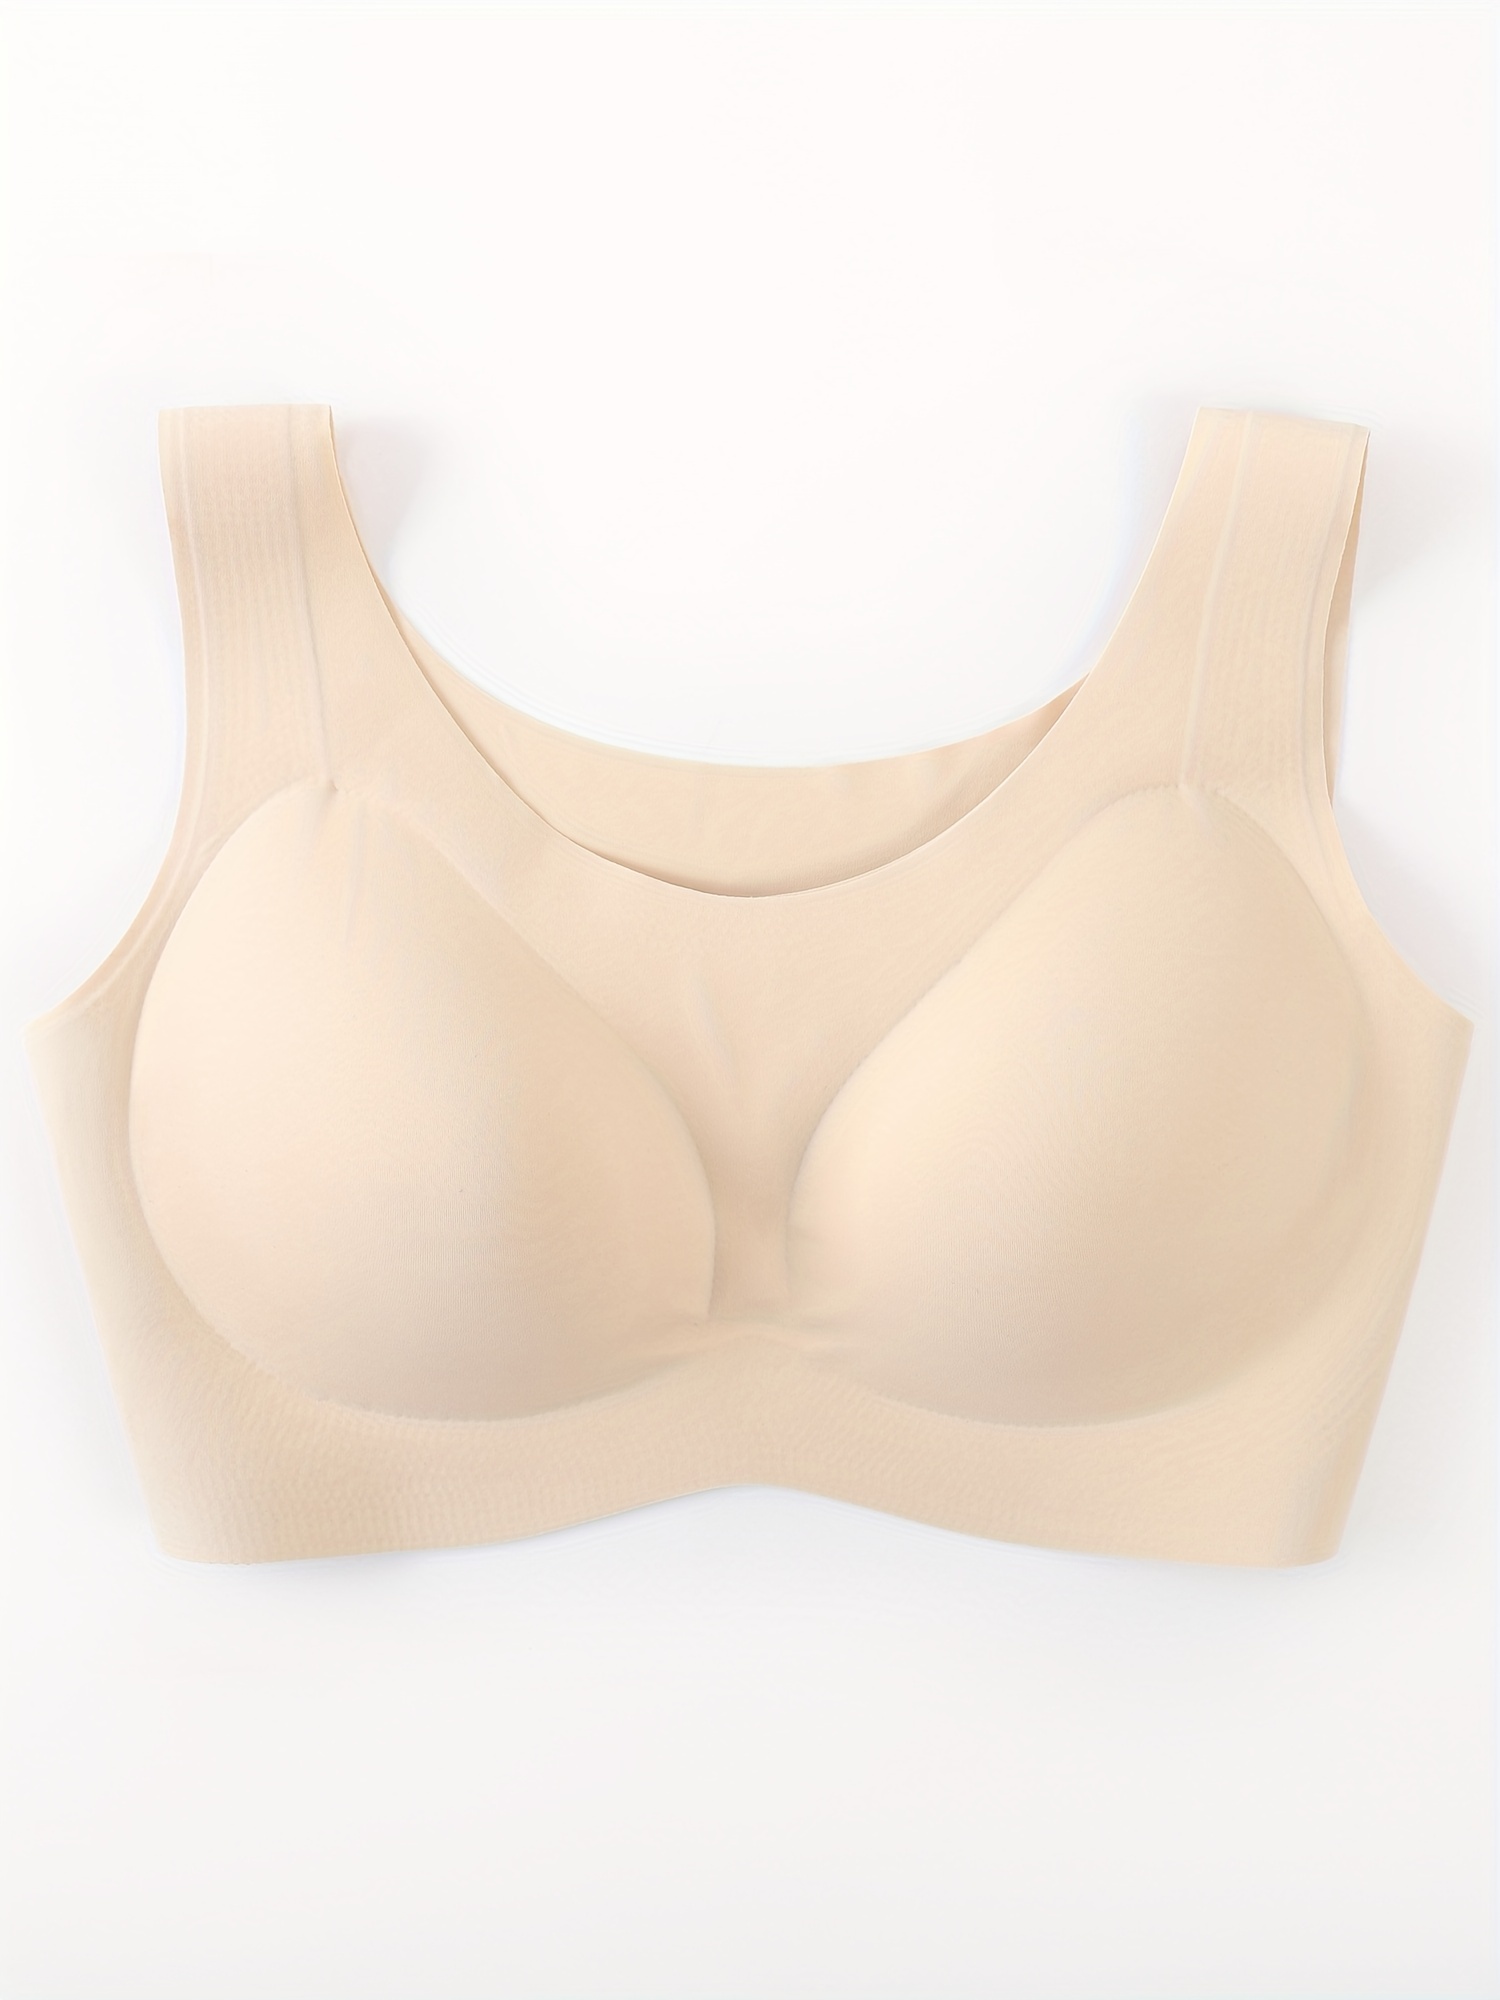 Women's Lightly Lined Minimizer Bra Full Coverage Soft Cup Push Up